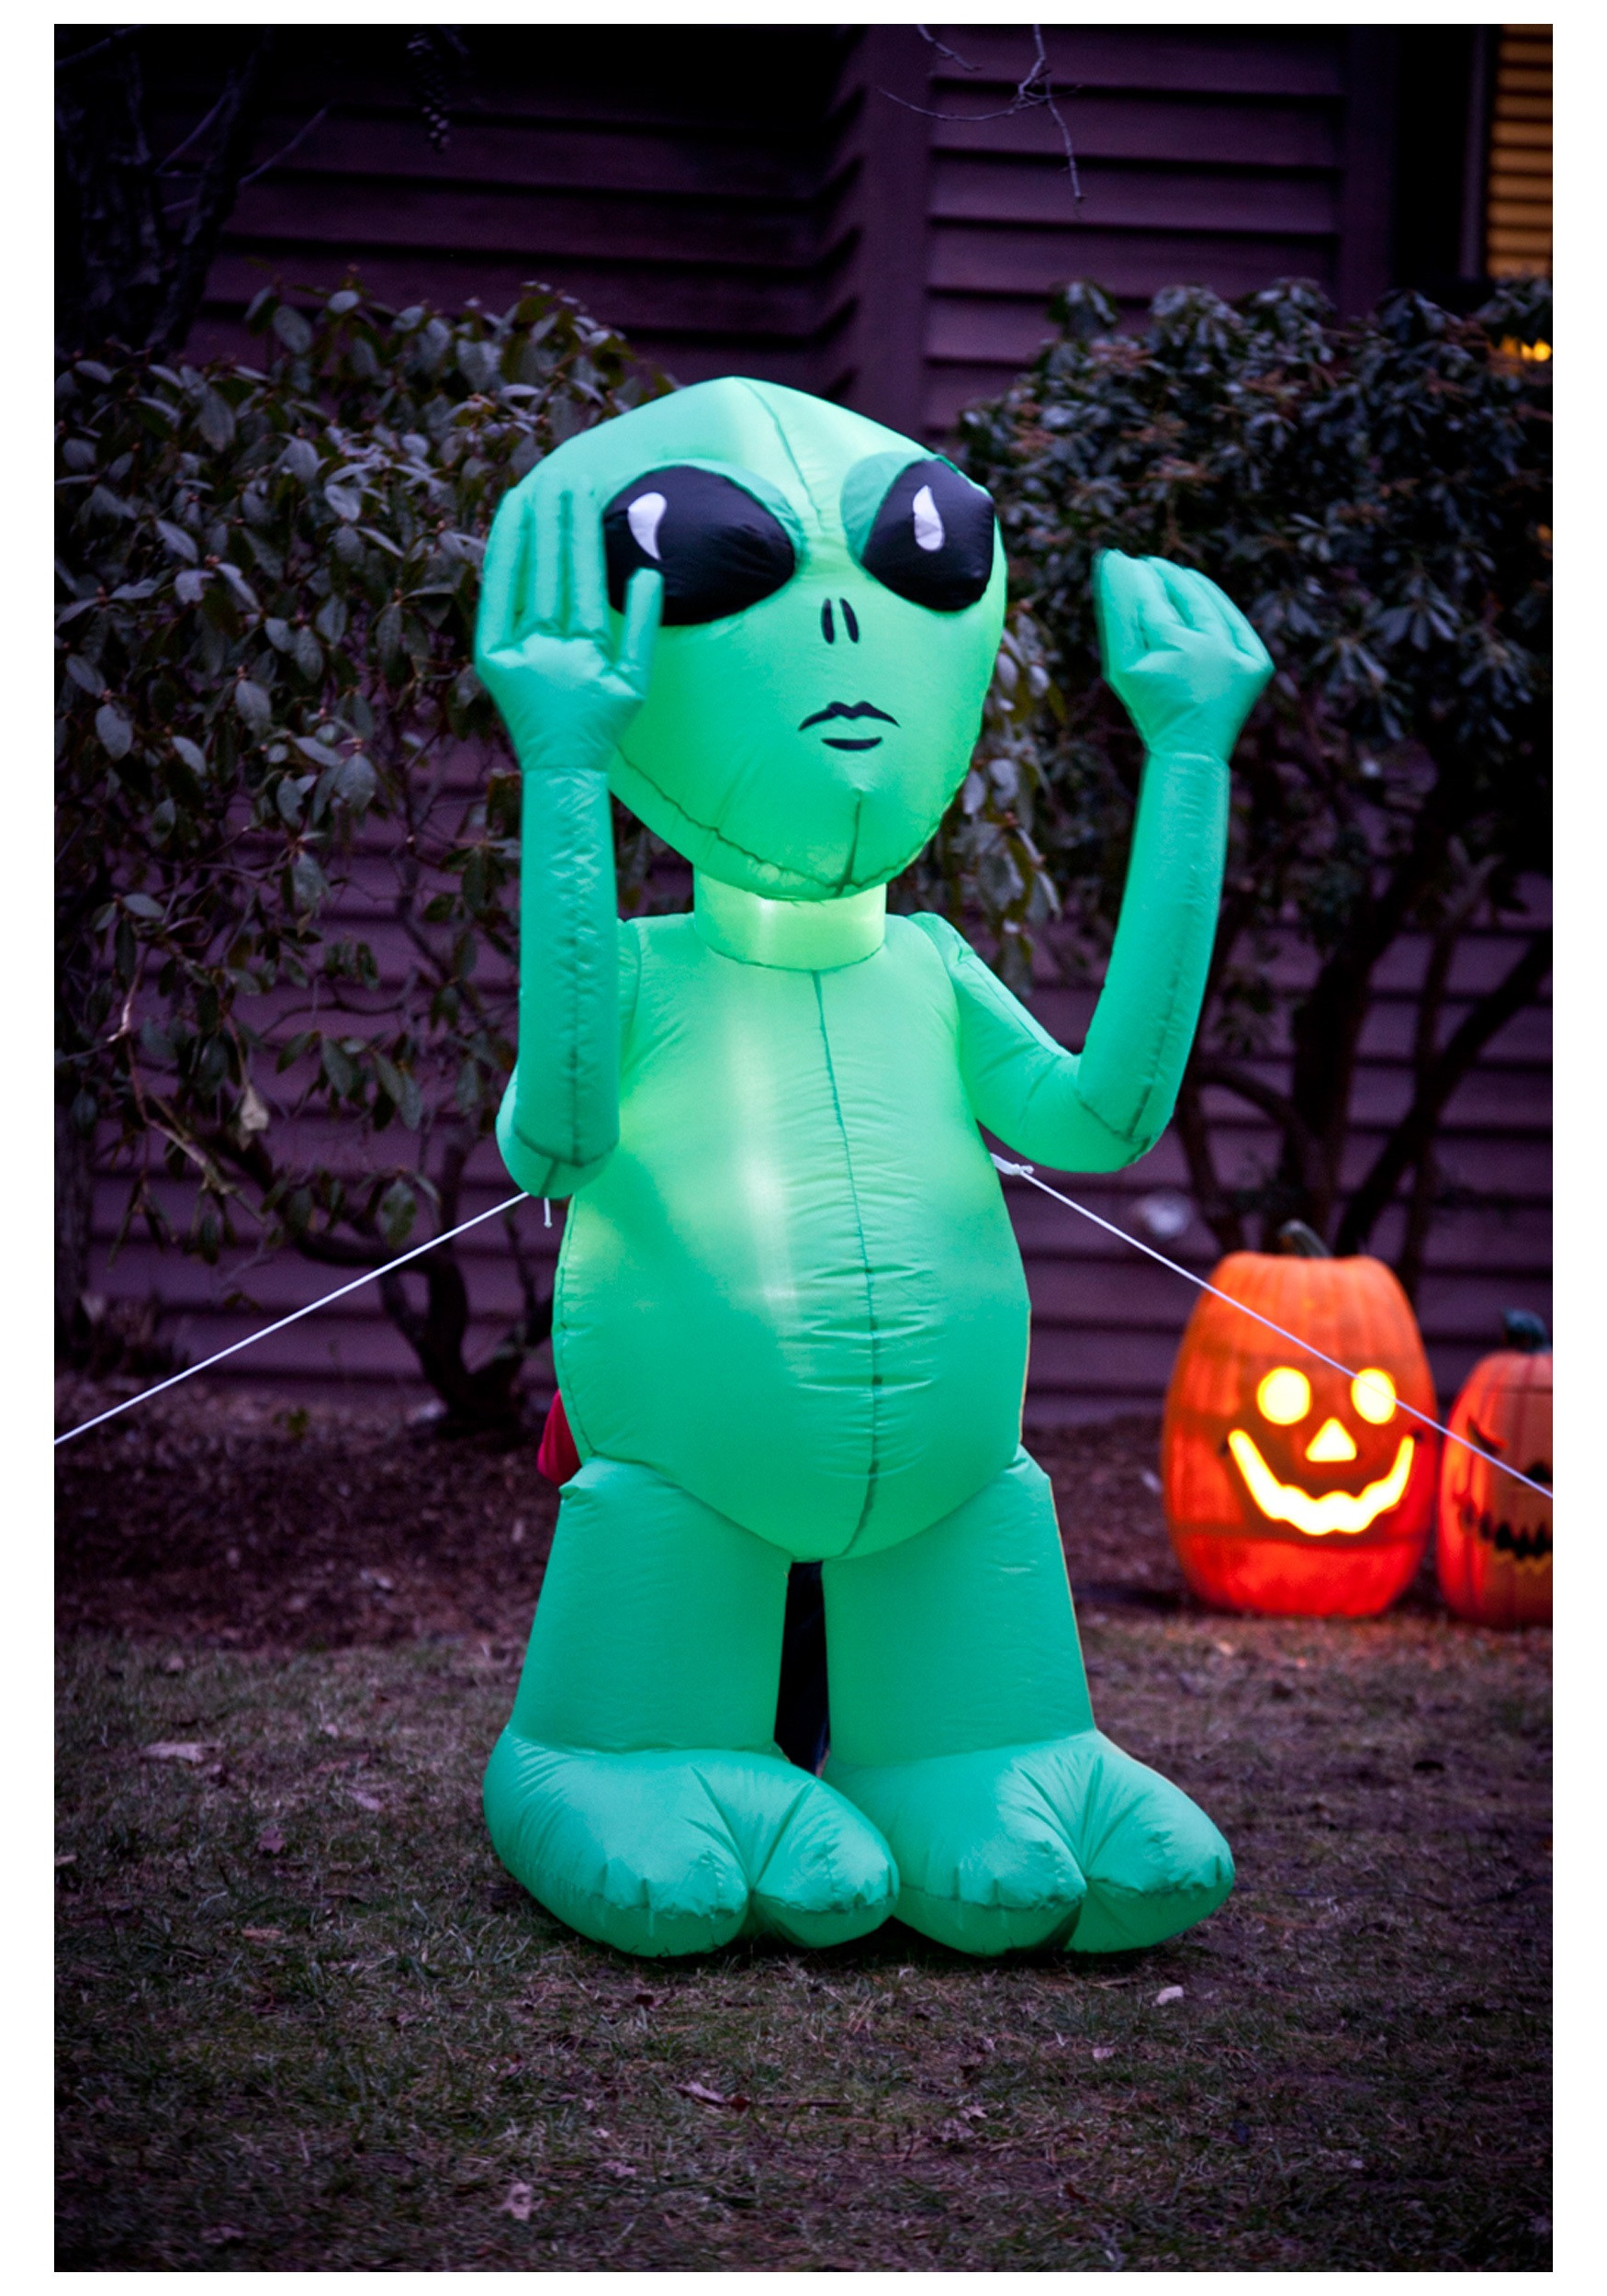 Outdoor Inflatable Halloween Decorations
 Alien Inflatable Lawn Decoration